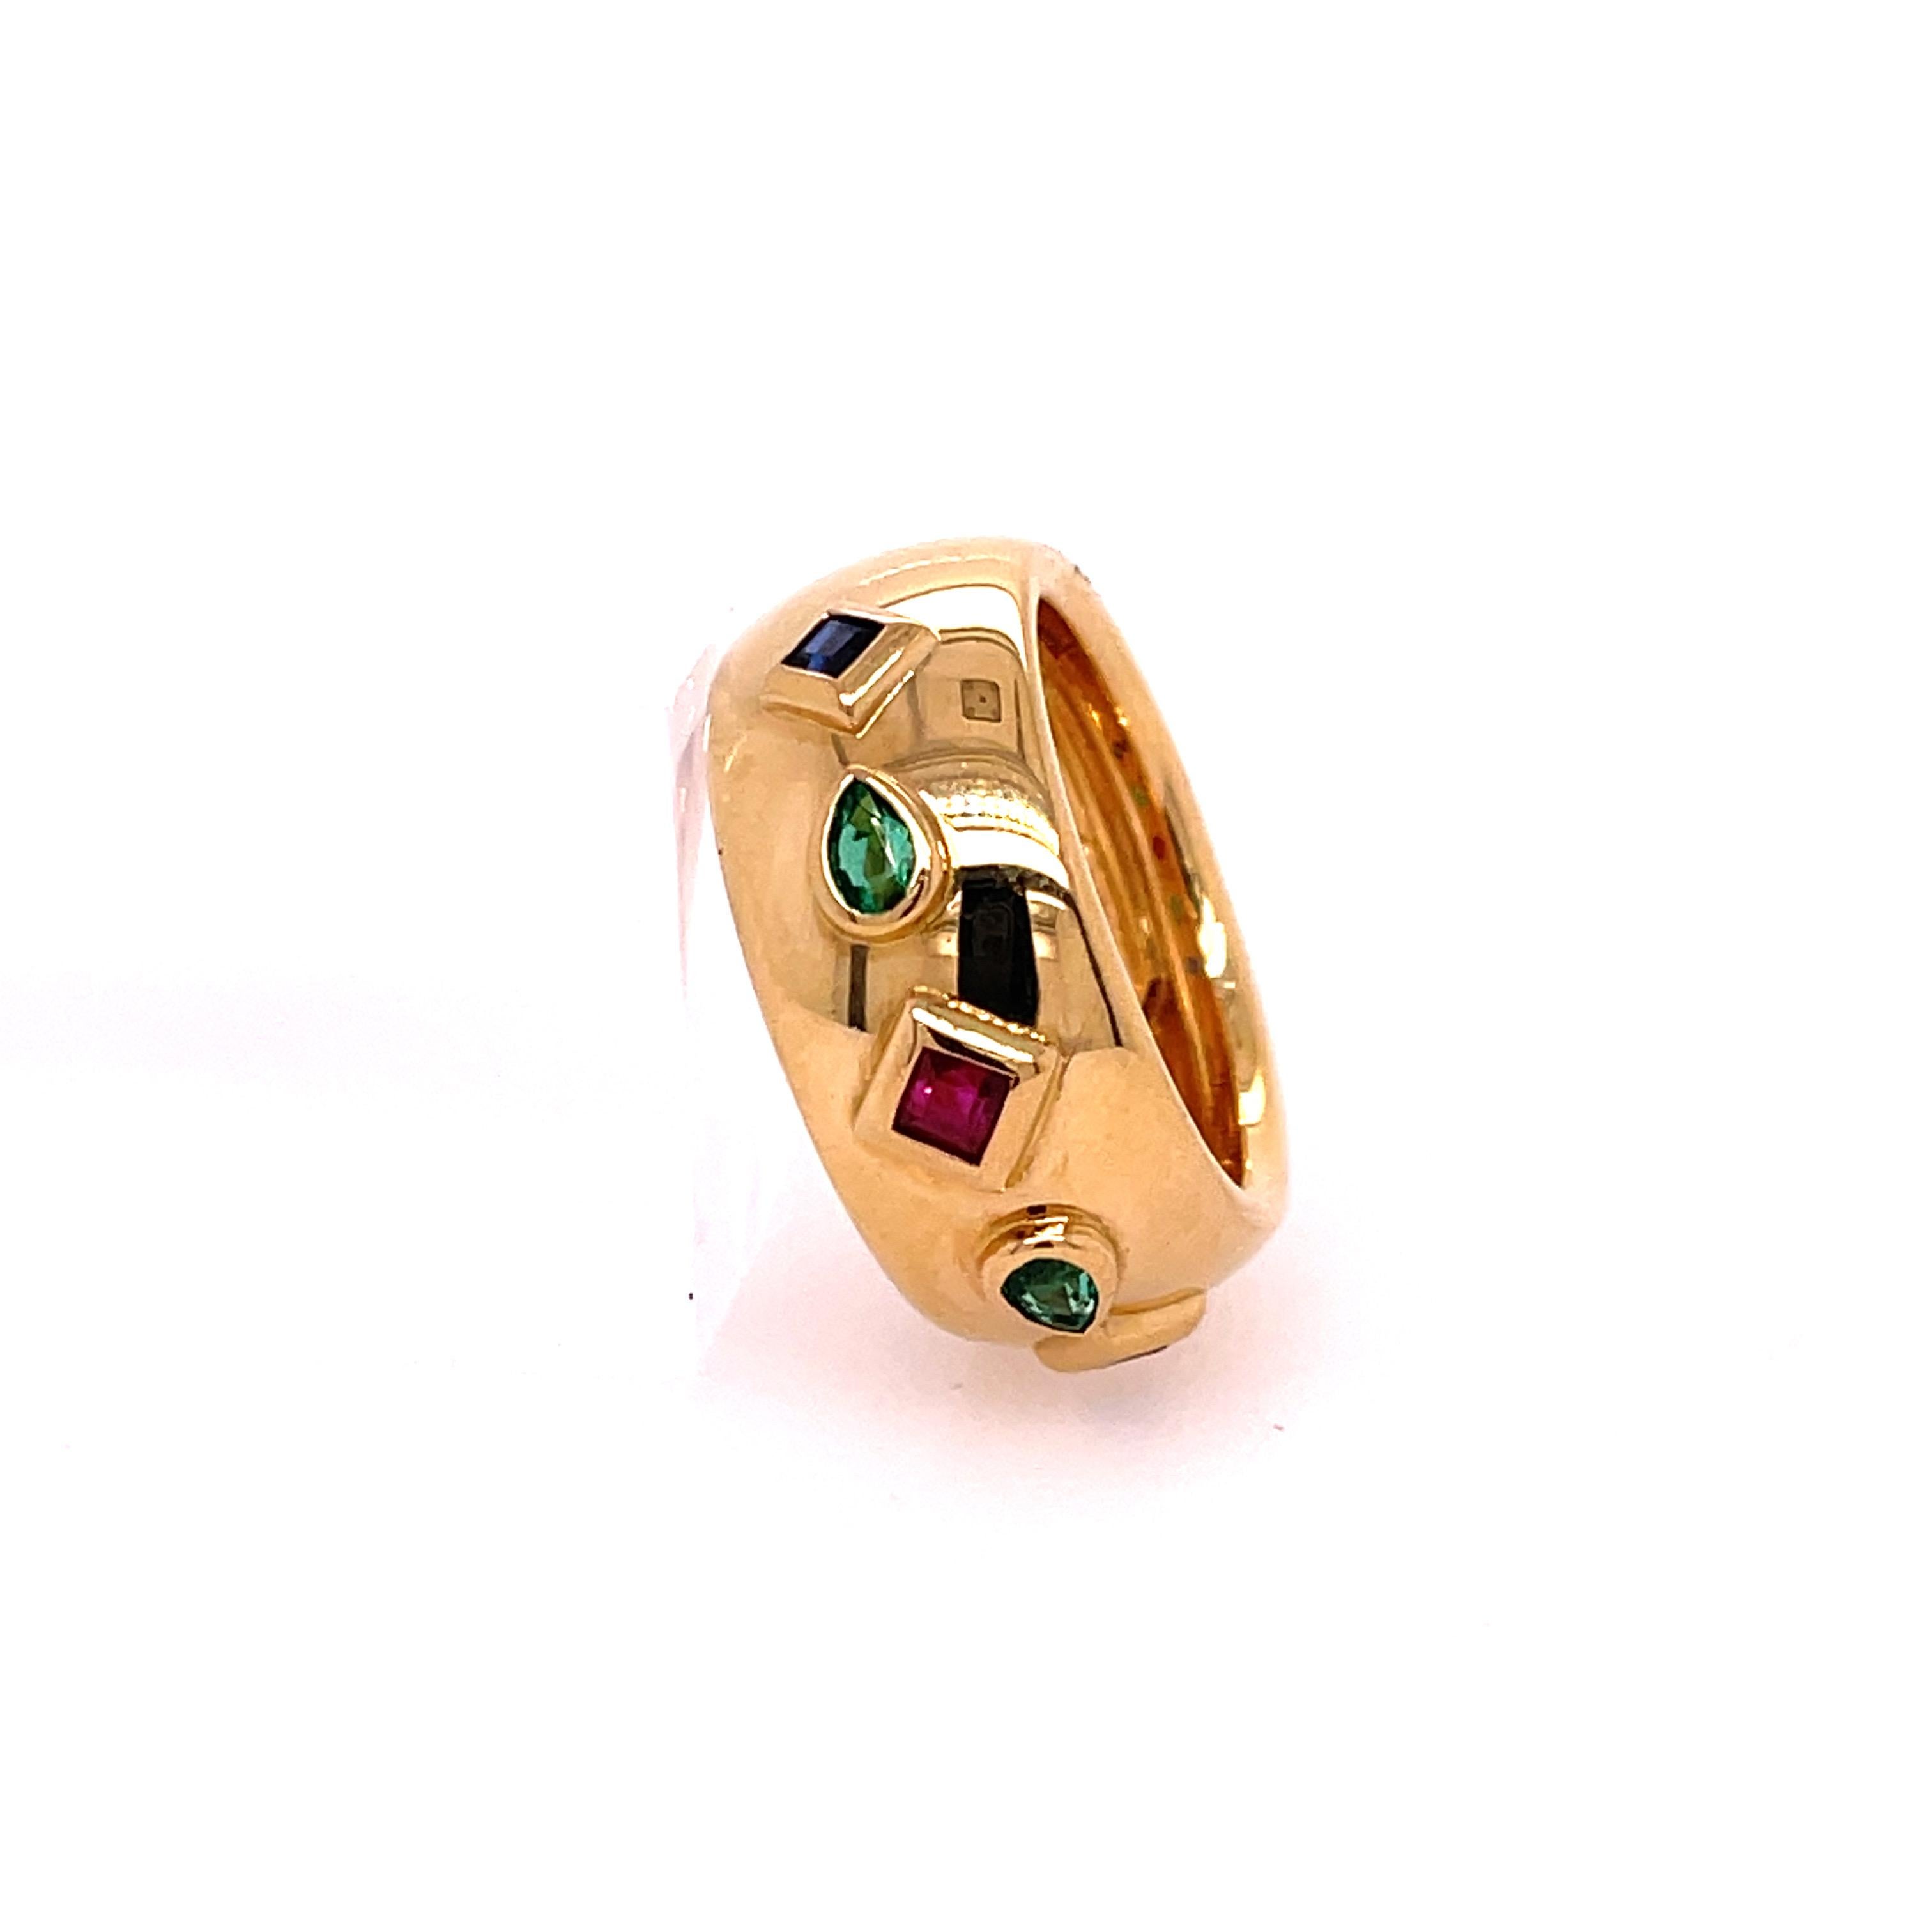 Cartier Byzantine Dome Band Yellow Gold & Gems. The band features two square cut sapphires, two pear shaped emeralds, and one square cut ruby. The width of the band is approximately 9.20mm. Ring size 5.5

10.6 grams